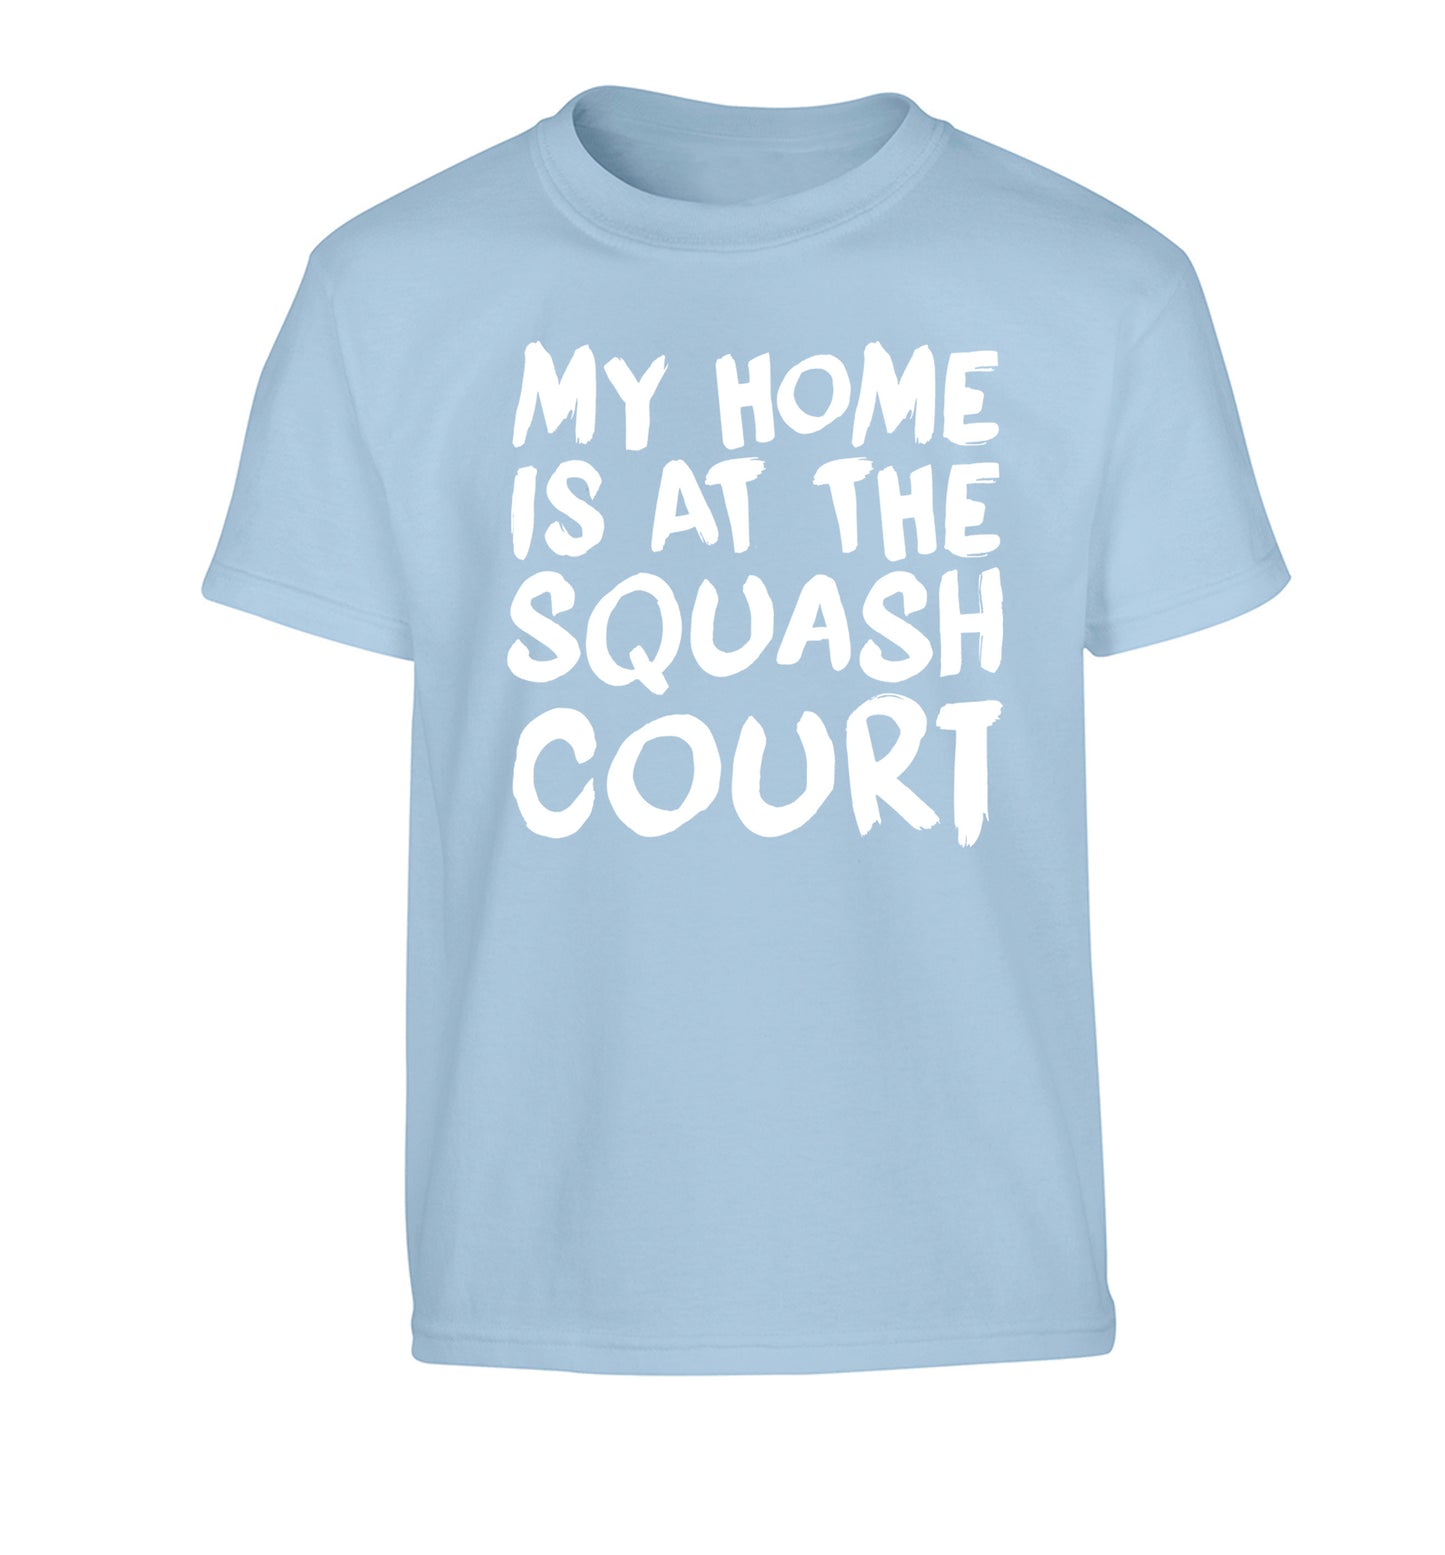 My home is at the squash court Children's light blue Tshirt 12-14 Years